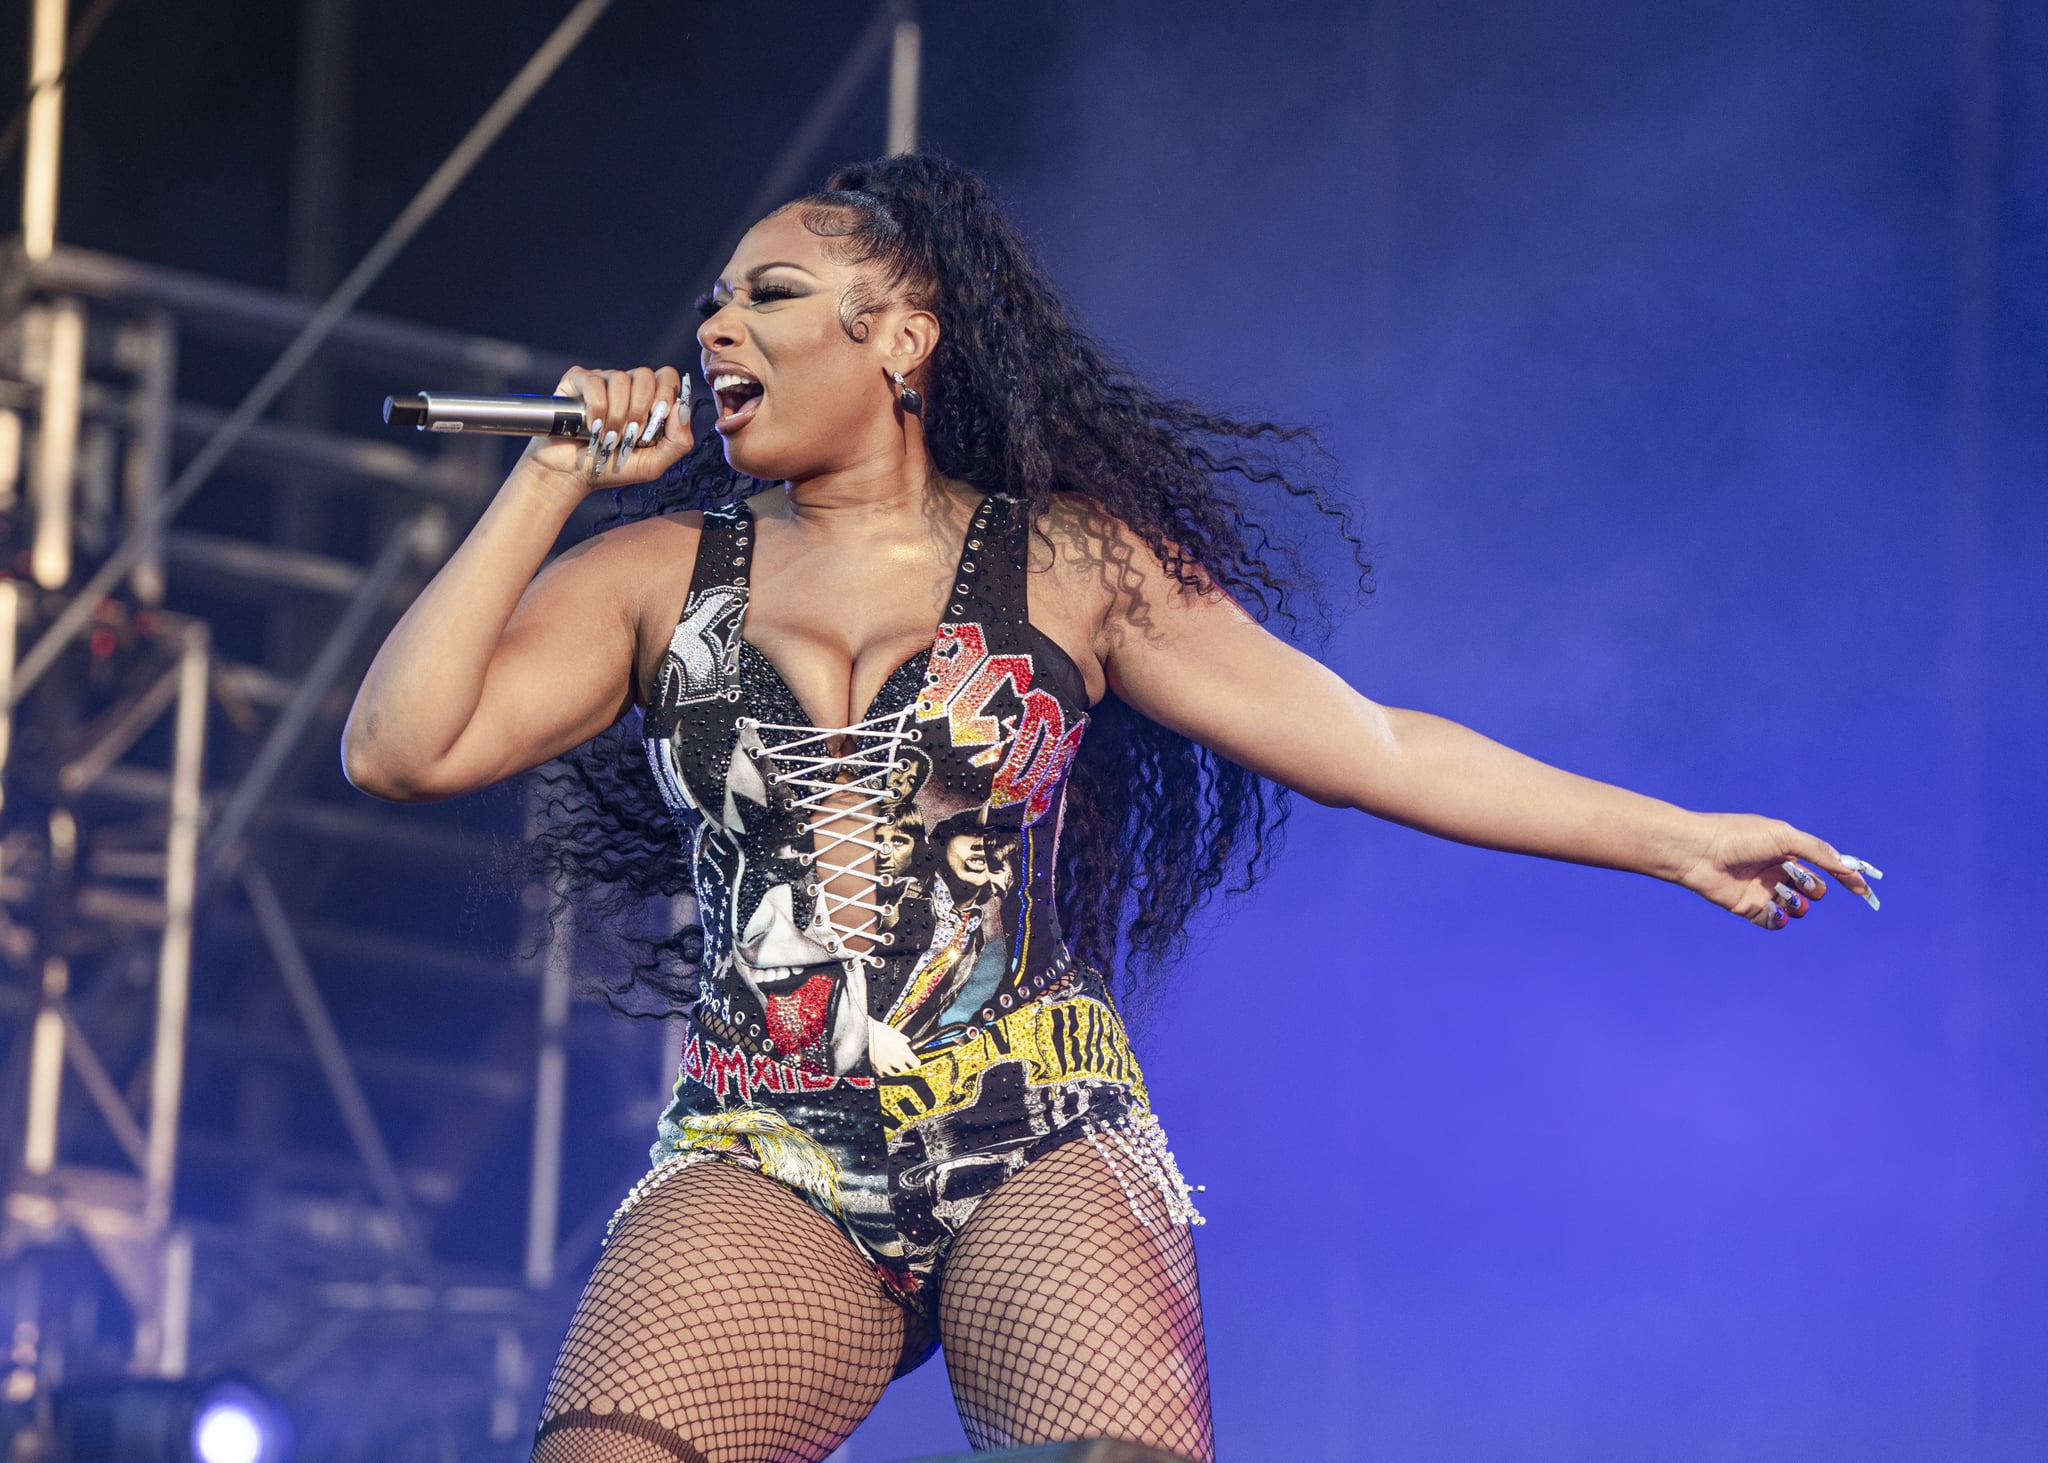 CHICAGO, ILLINOIS - JULY 31: Megan Thee Stallion performs on day 3 of Lollapalooza at Grant Park on July 31, 2021 in Chicago, Illinois. (Photo by Scott Legato/Getty Images)